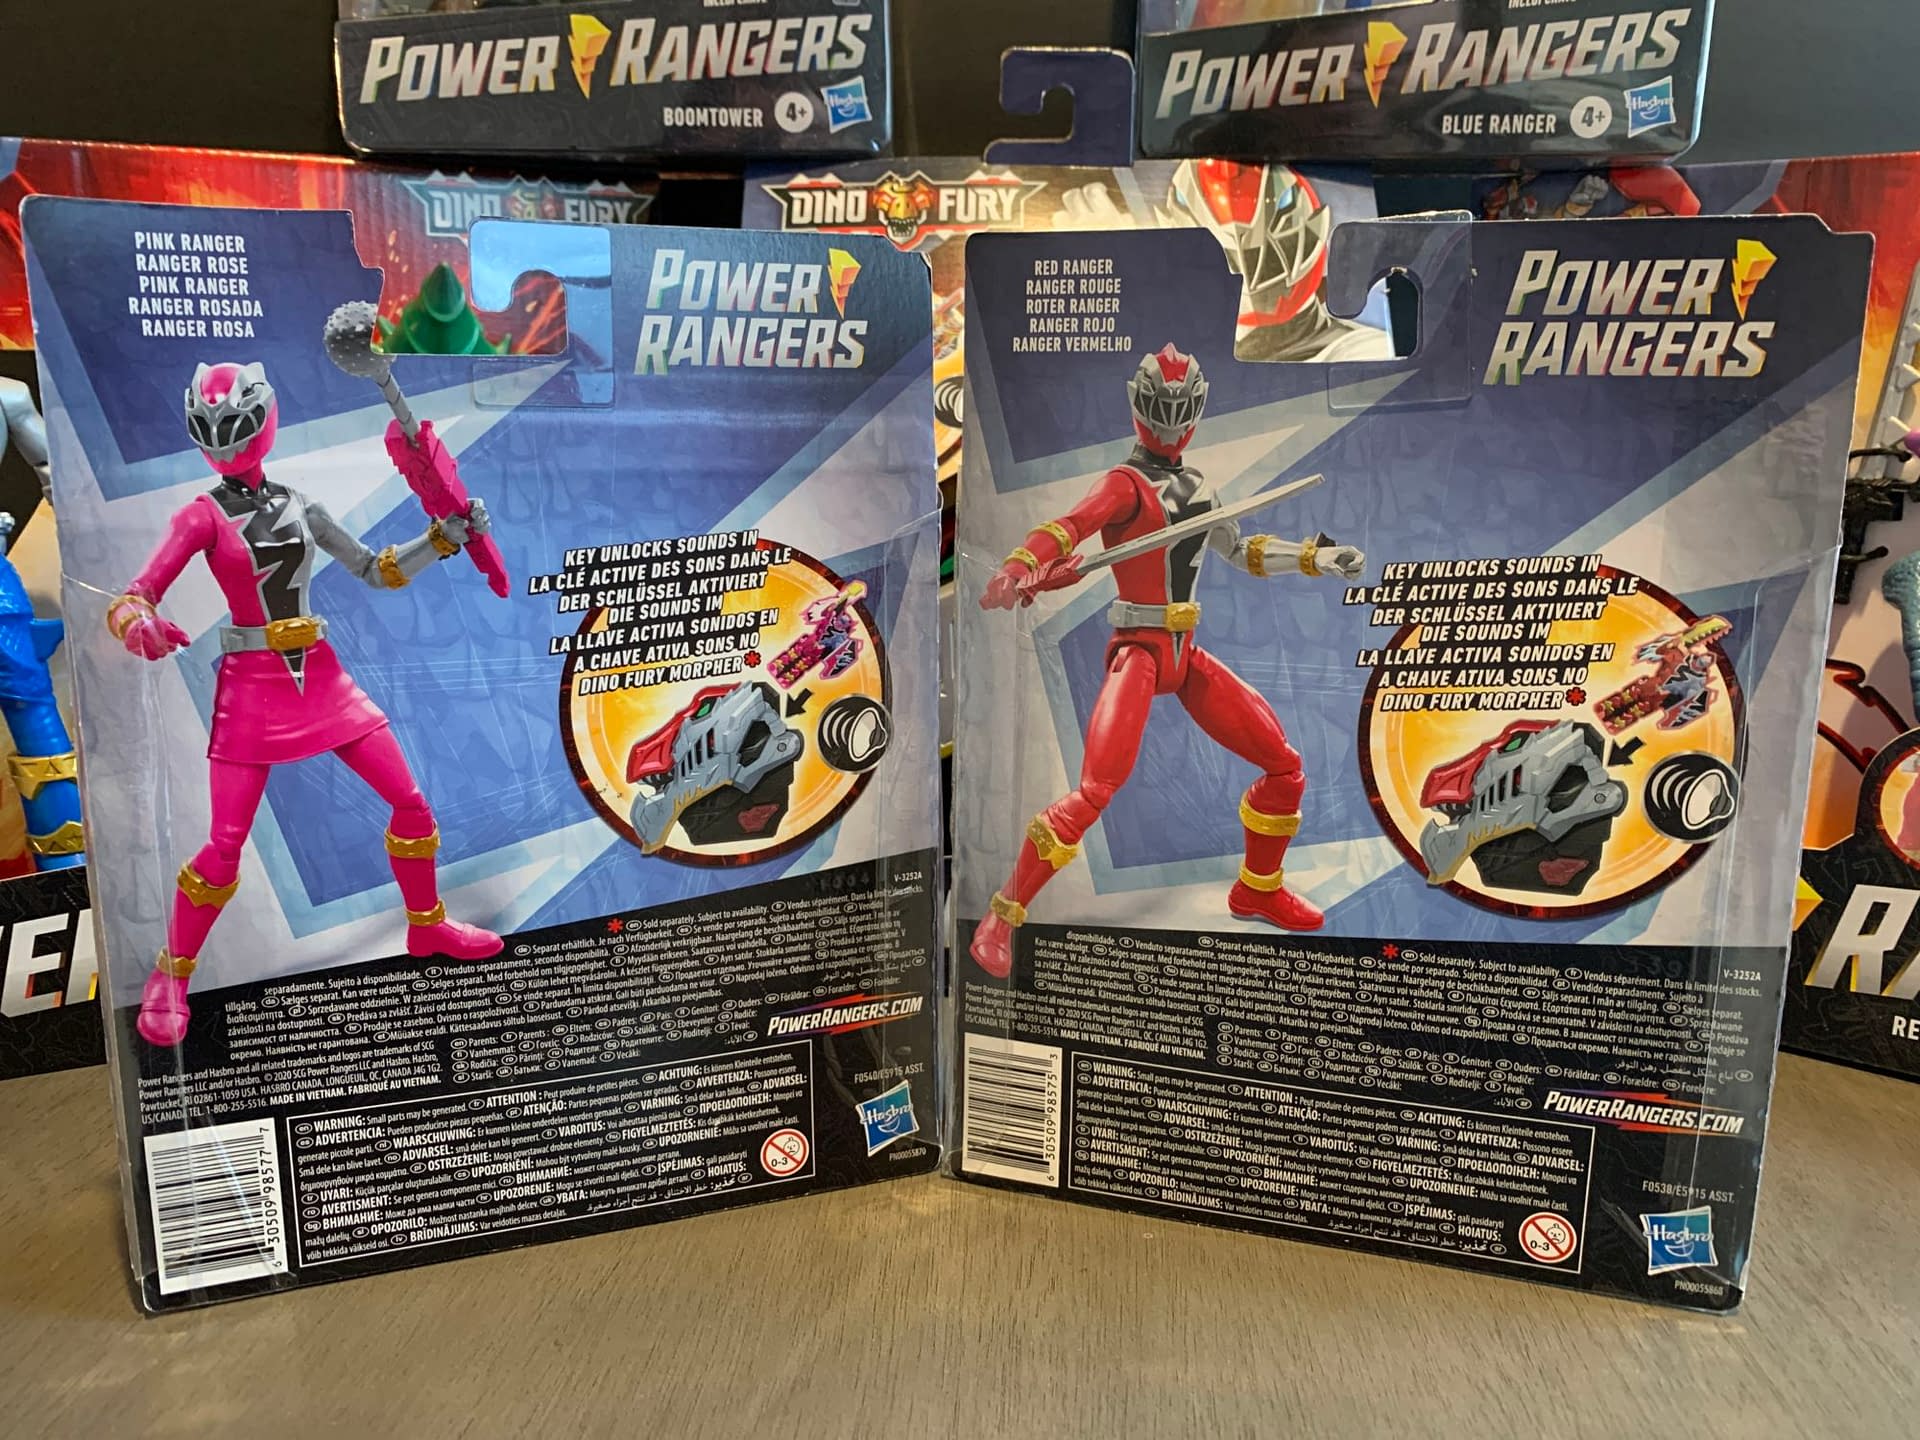 Unboxing A Power Rangers Box From Hasbro: Lightning Collection & More